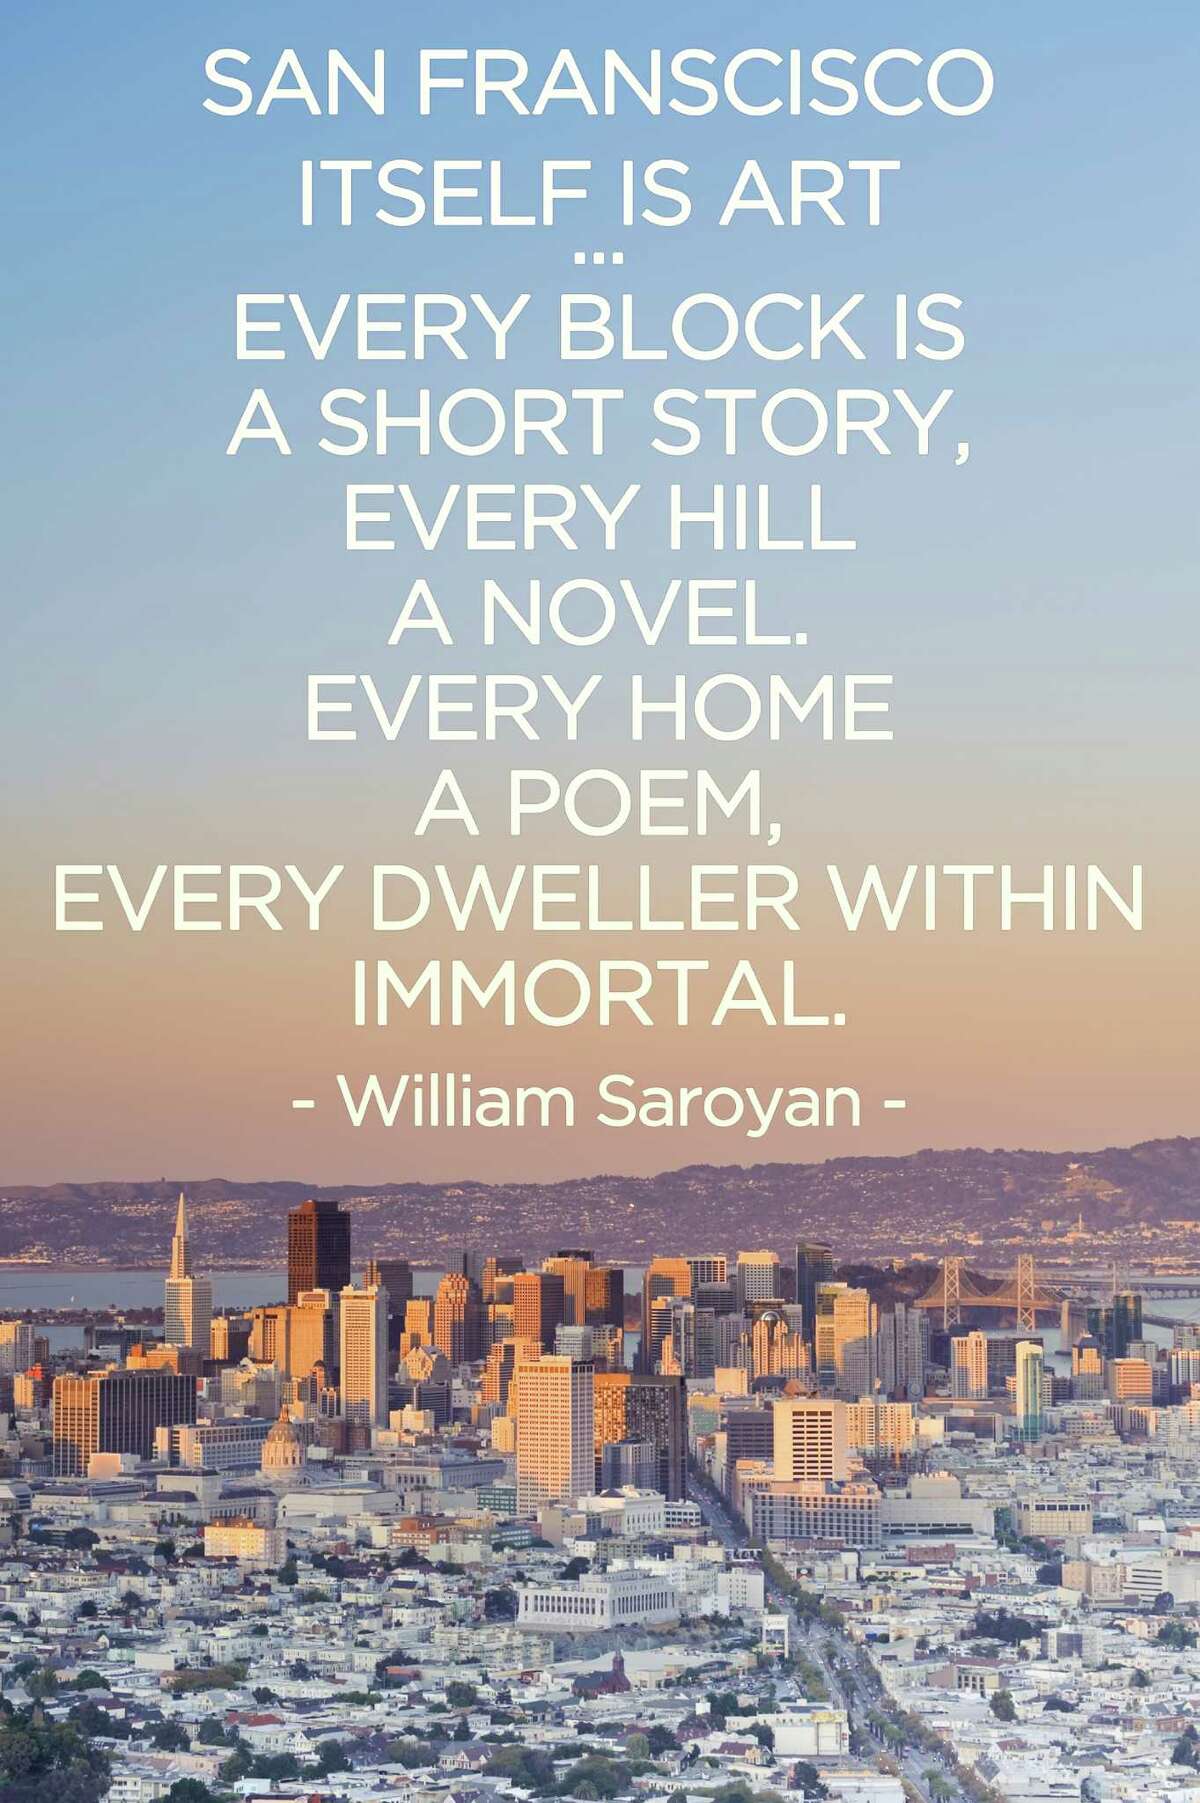 20 of our favorite quotes about San Francisco.